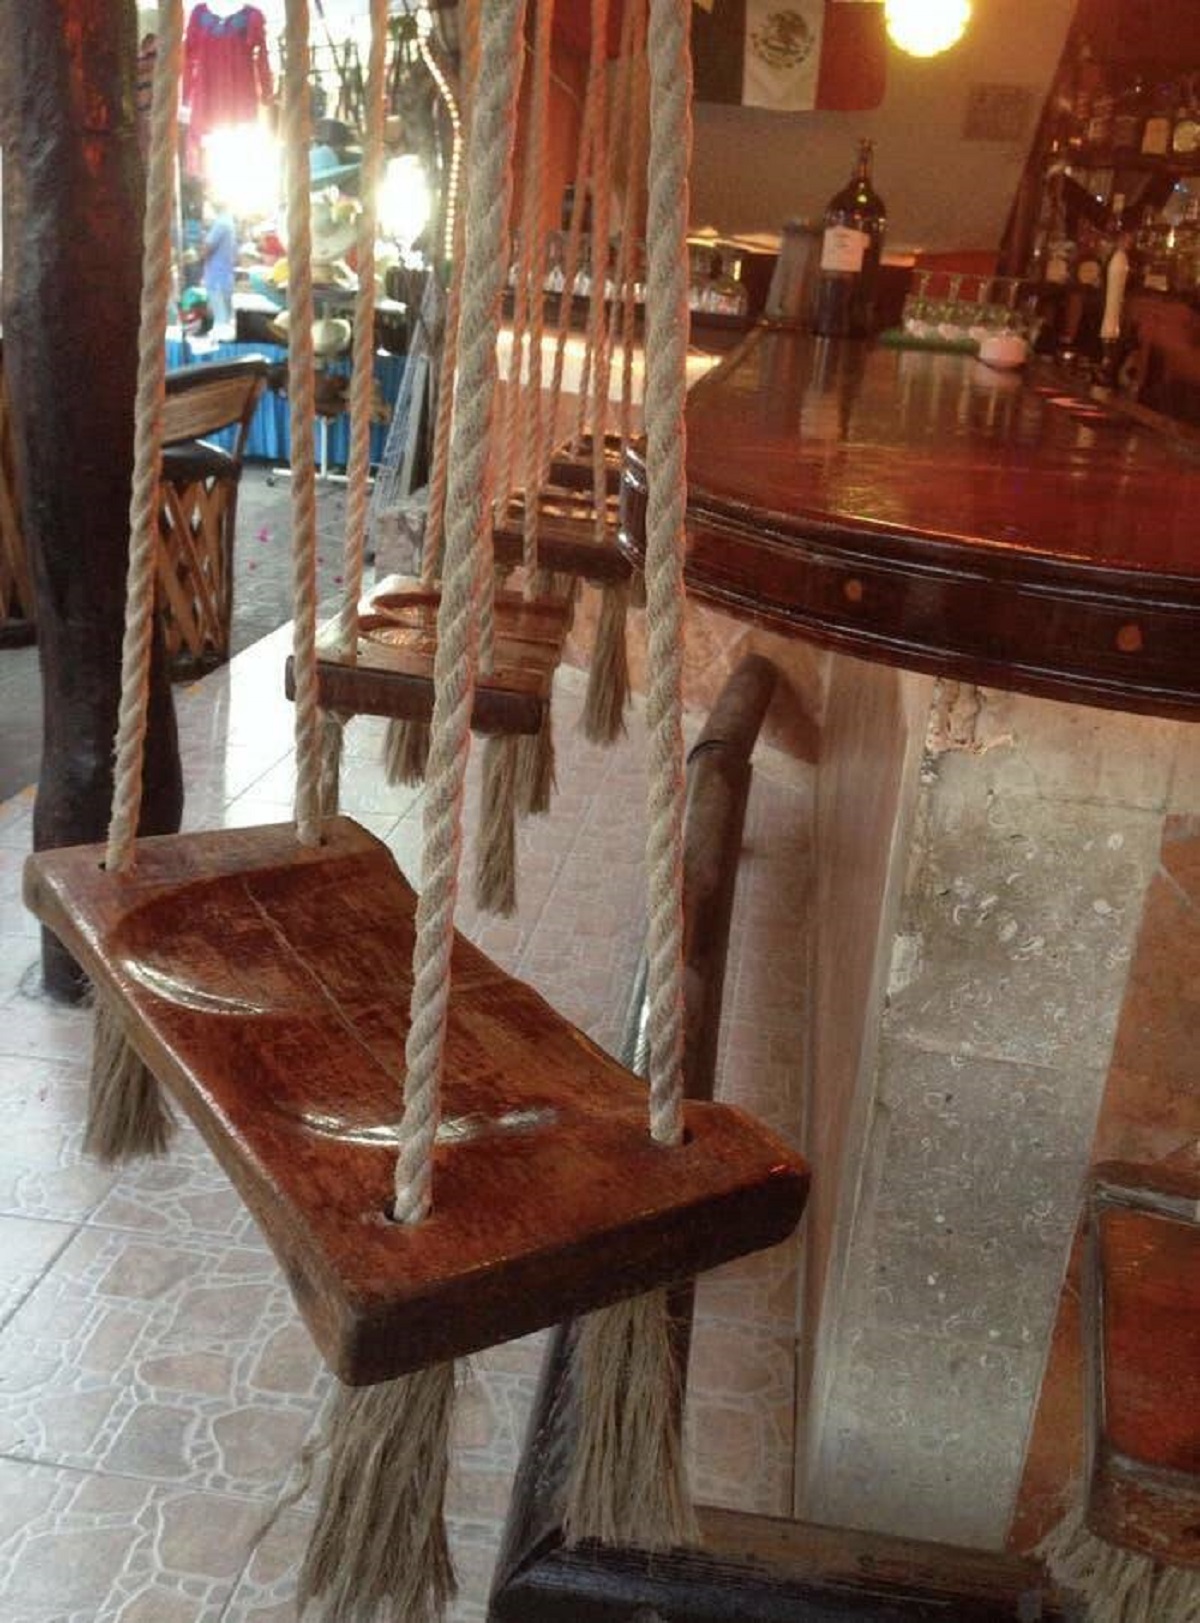 I need to go to this bar in Mexico with swings for chairs immediately.